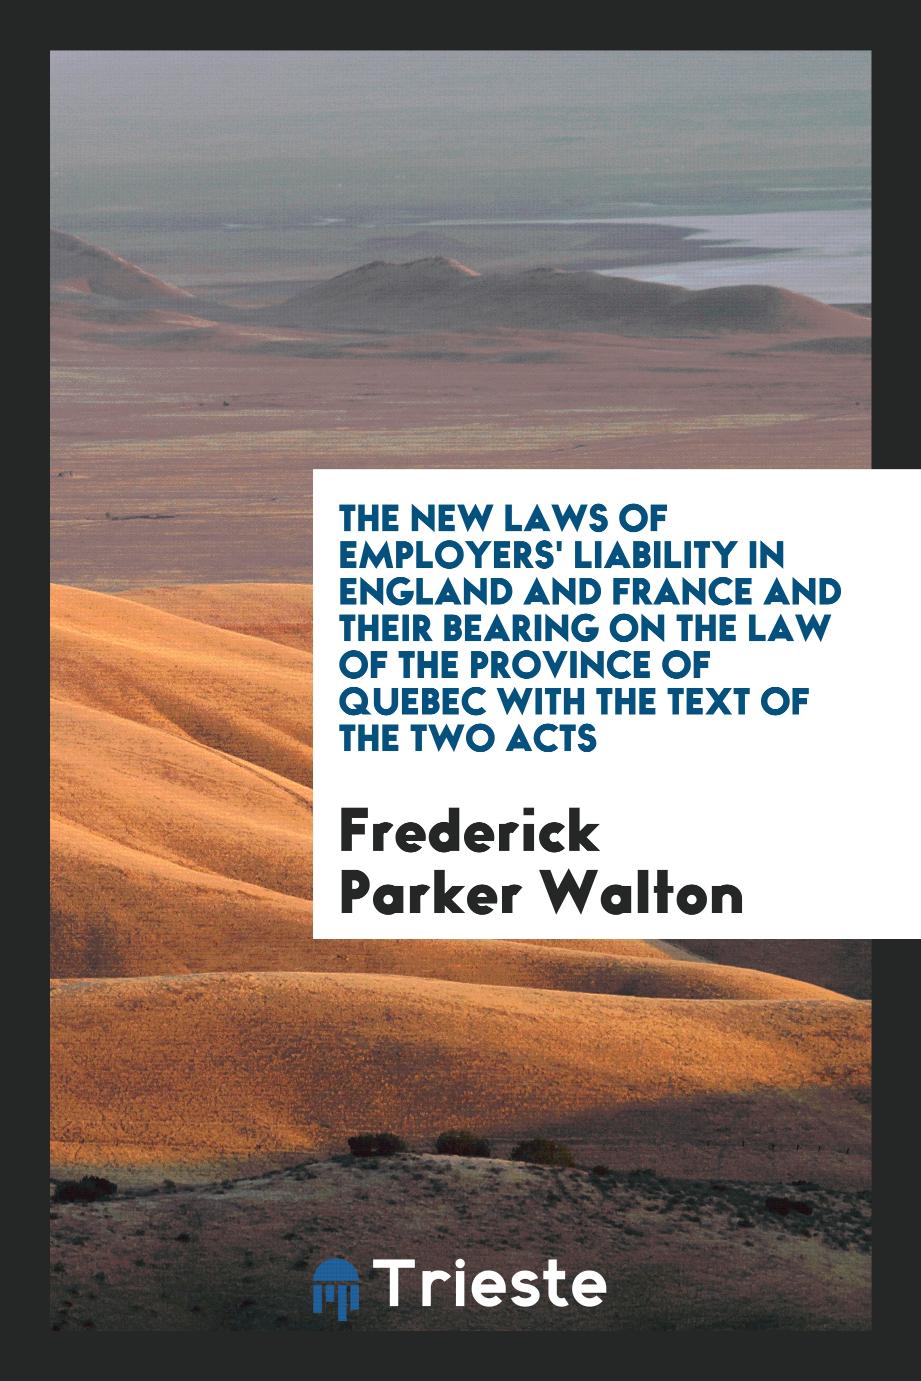 The New Laws of Employers' Liability in England and France and Their Bearing on the law of the province of Quebec with the text of the two acts